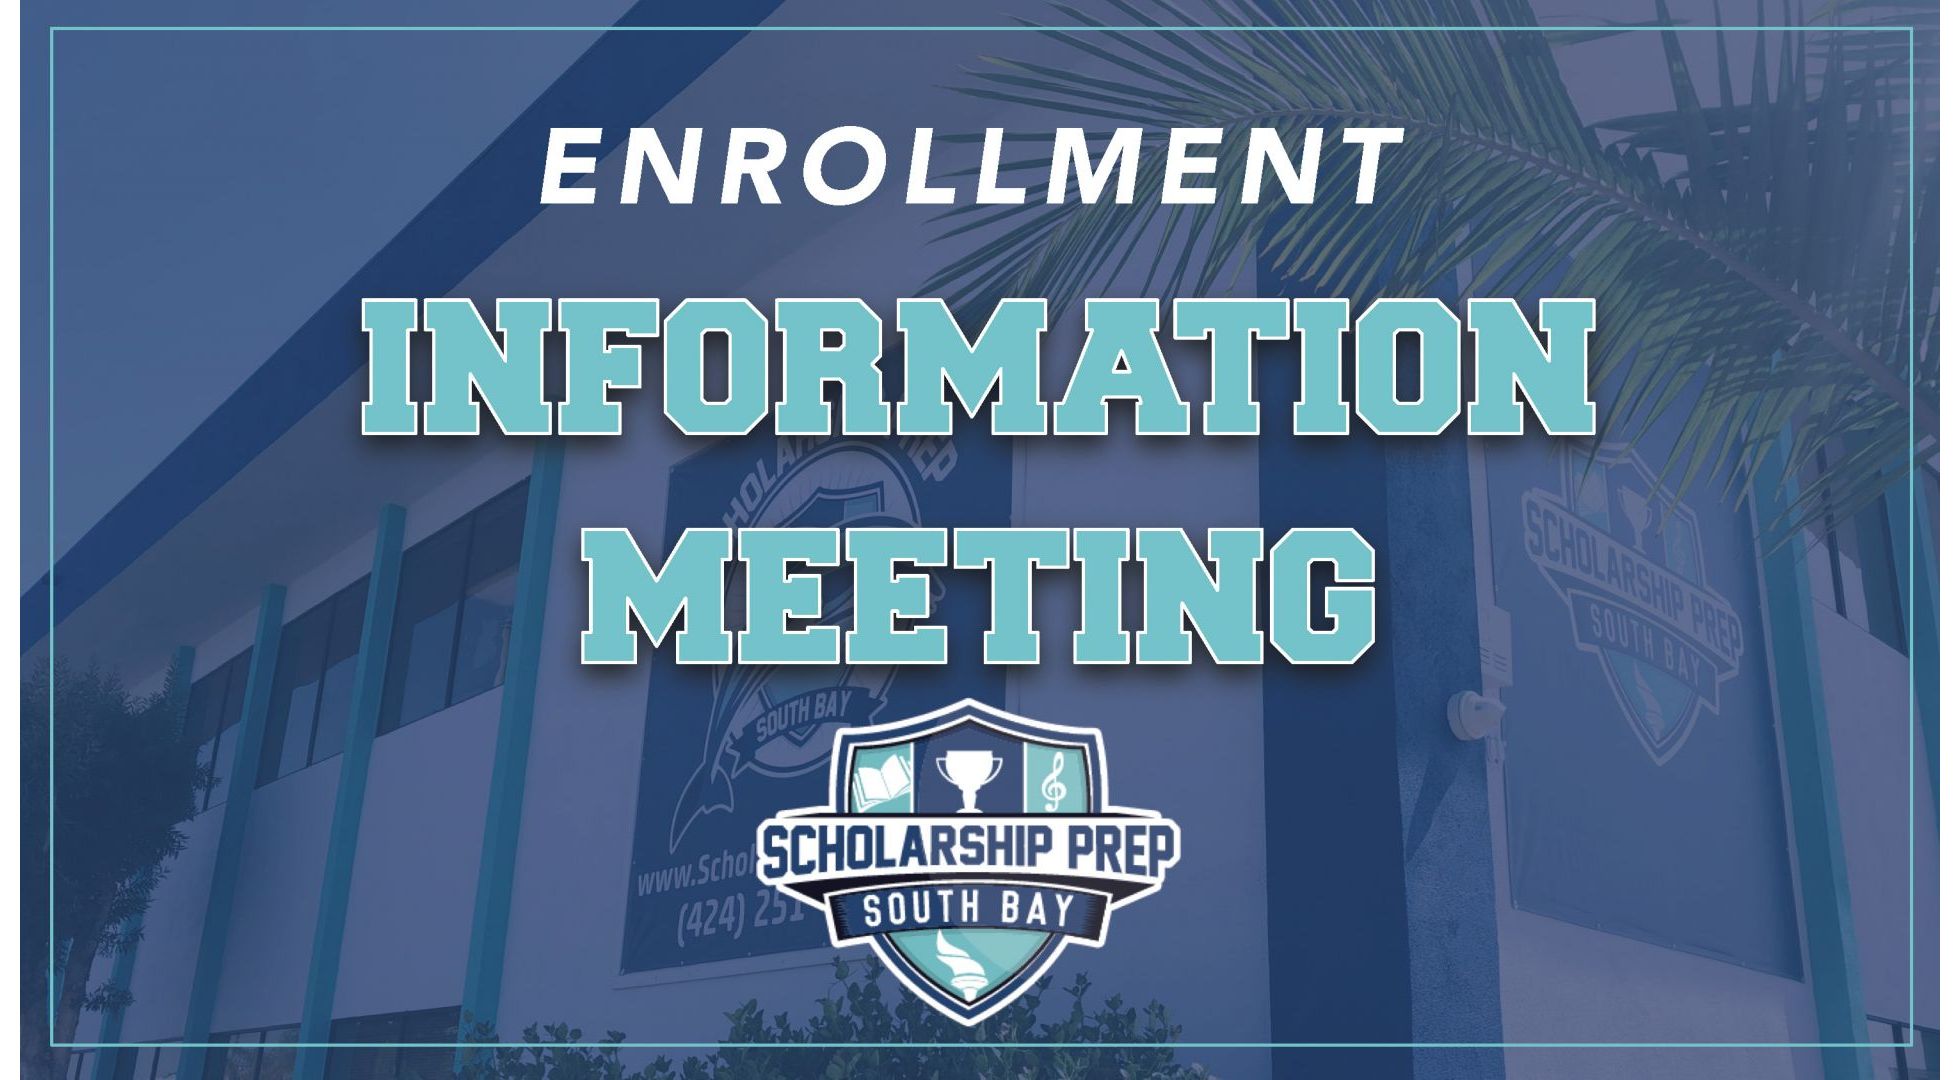 UPDATED: Join Us For An Enrollment Information Meeting & Campus Tour